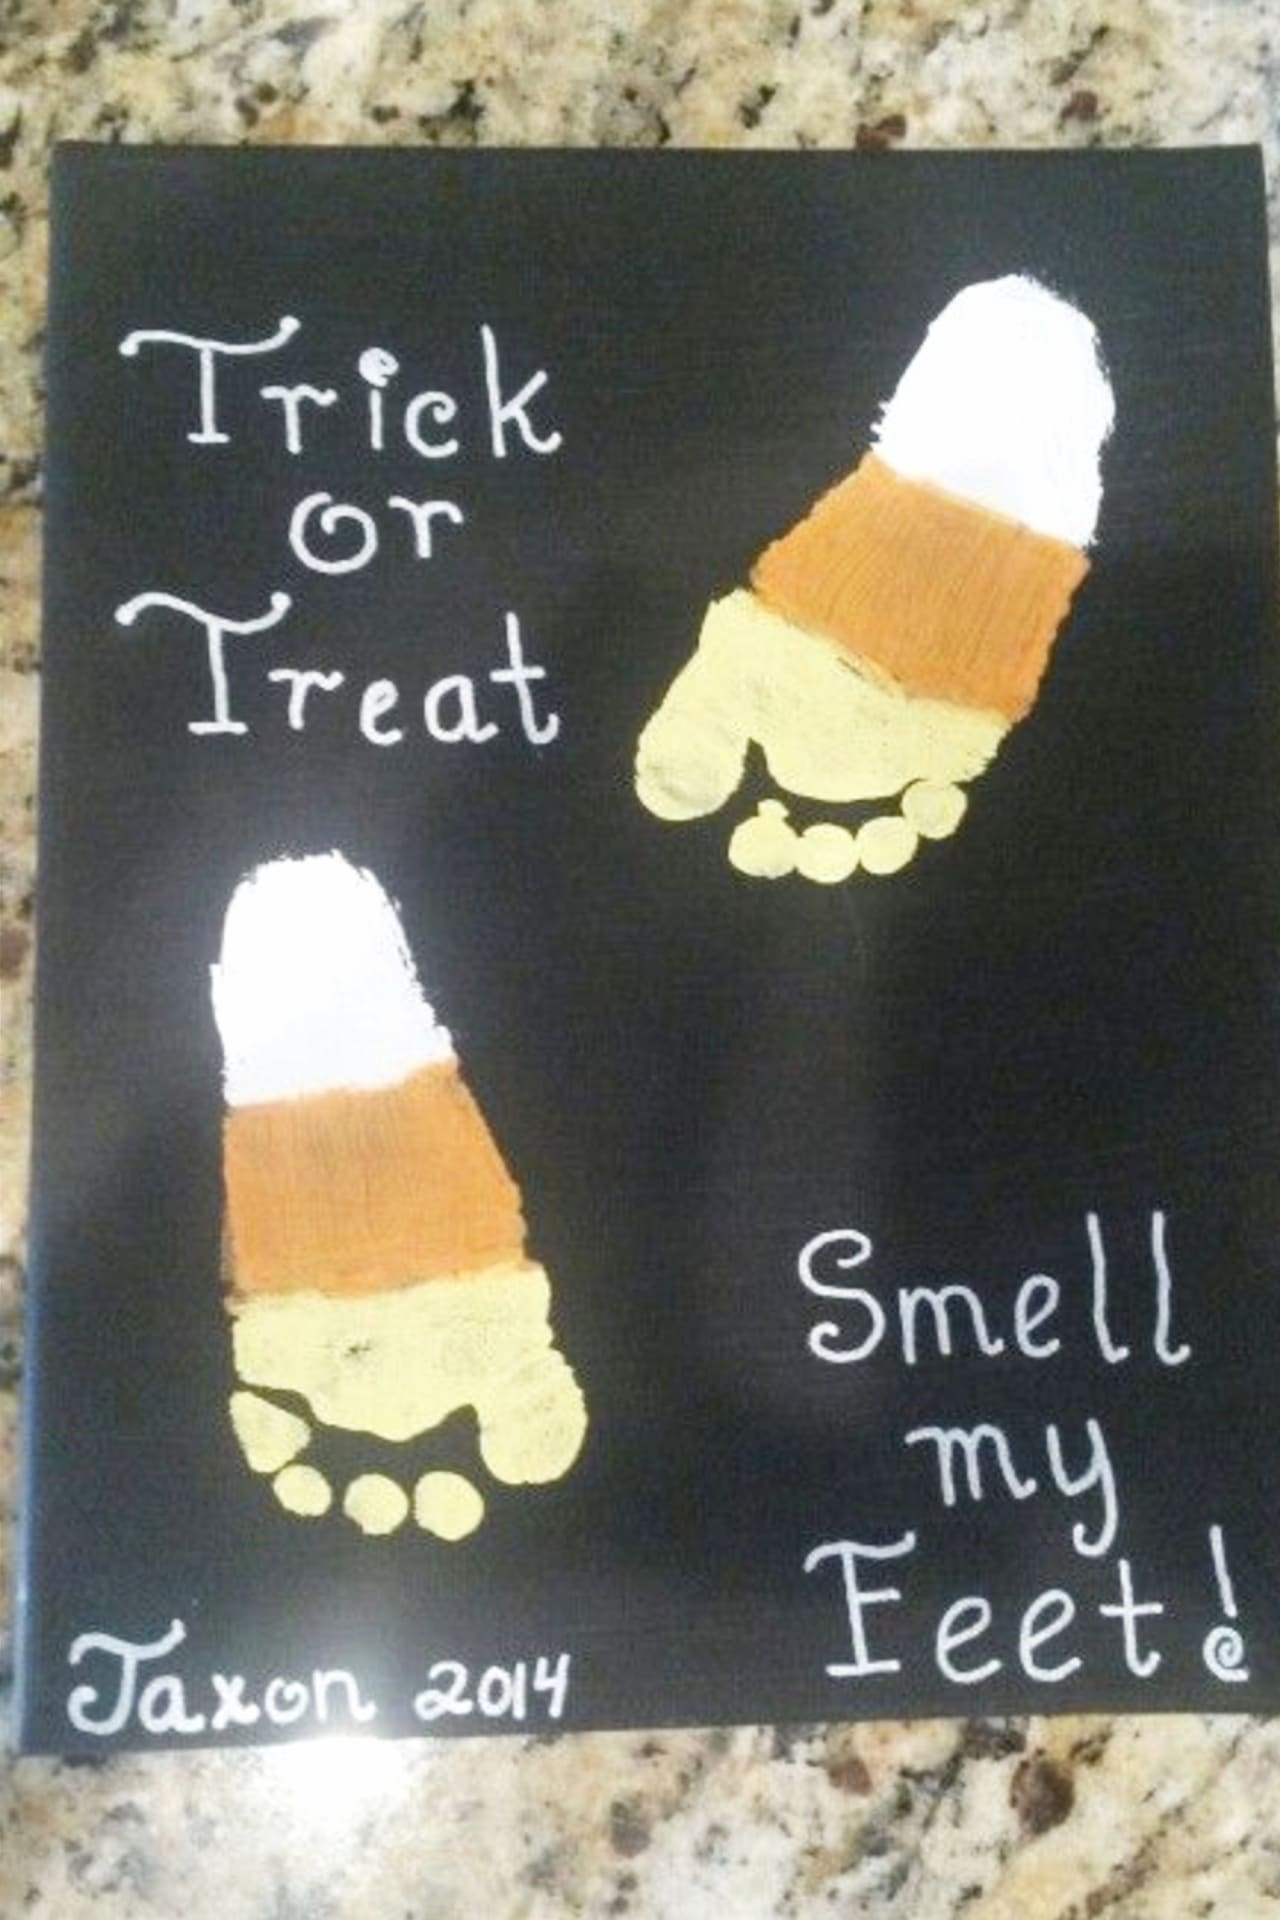 Halloween Art Projects for Toddlers! -fall art activities for toddlers and fun fall crafts for Sunday school, Pre-K, homeschool, and early childhood classrooms...  Fall Crafts For Toddlers To Make - Simple Fall Crafts and Art Projects For Toddlers in Preschool, Daycare, Pre-K and Sunday School to Make At School or Home - Celebrate the Fall season by having the children in your class make these Fall crafts with hand prints, leaves, Halloween ghosts, pumpkins and other fun Autumn Fall art projects to take home or to decorate your classroom.